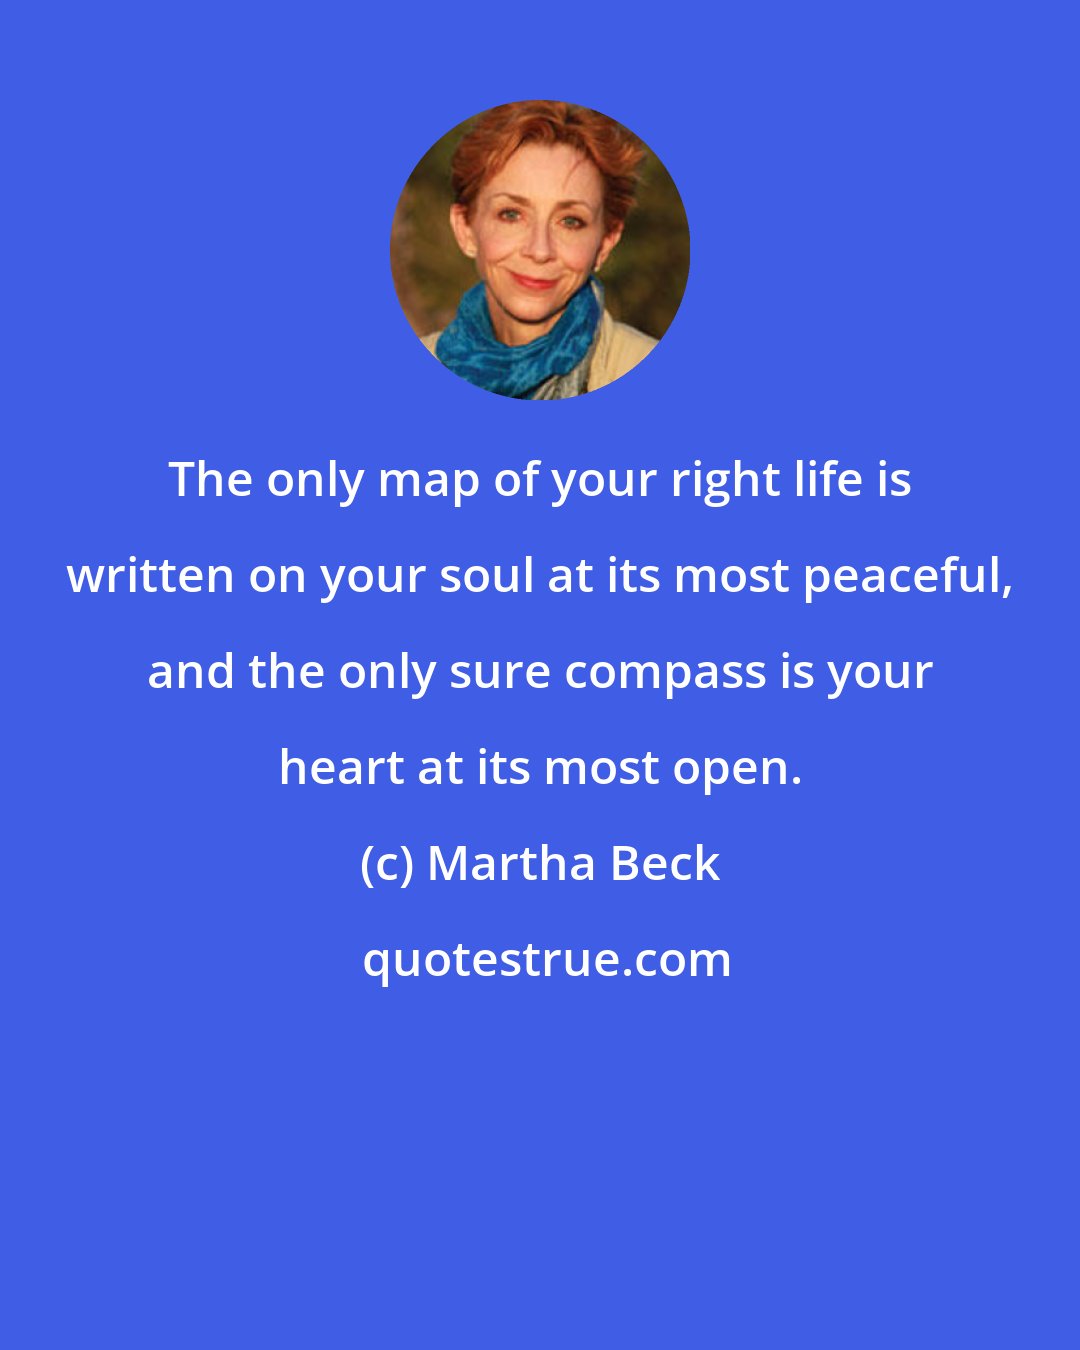 Martha Beck: The only map of your right life is written on your soul at its most peaceful, and the only sure compass is your heart at its most open.